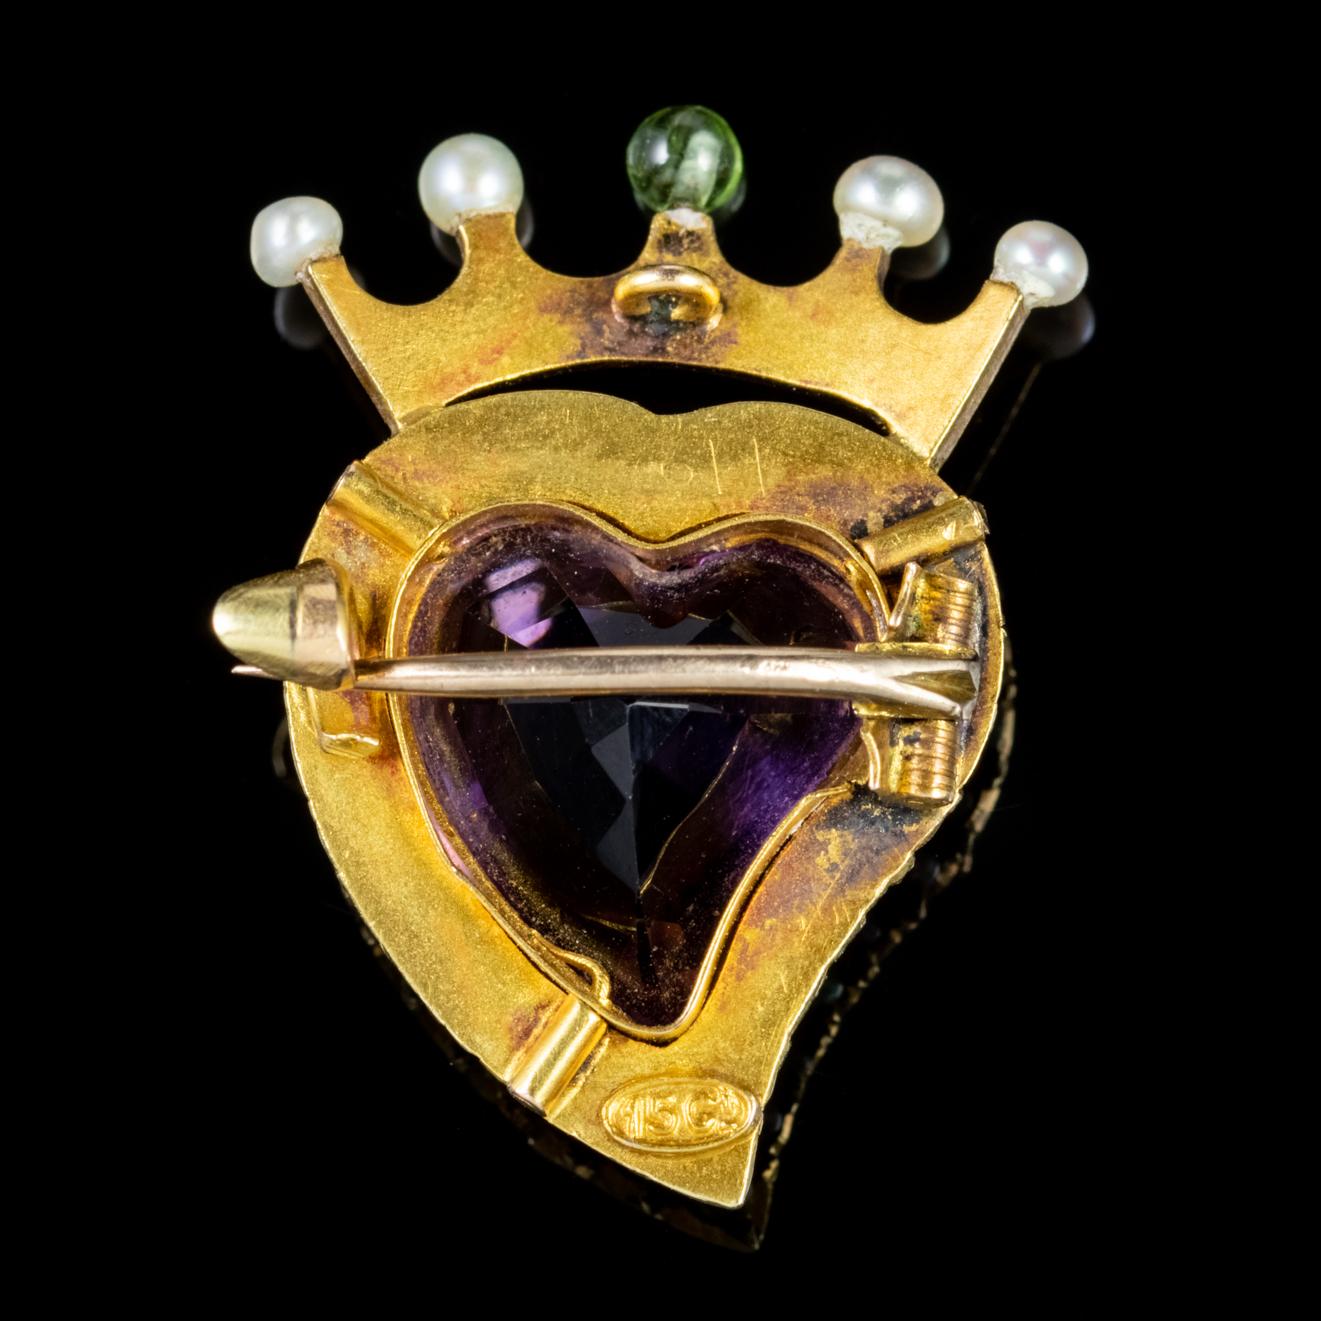 A stunning Edwardian brooch, this piece has been expertly crafted in 15ct Yellow Gold, with a large heart-cut Amethyst at its centre. The heart is ringed with pearls, and each of the points of the crown are tipped with Pearls and a single bright